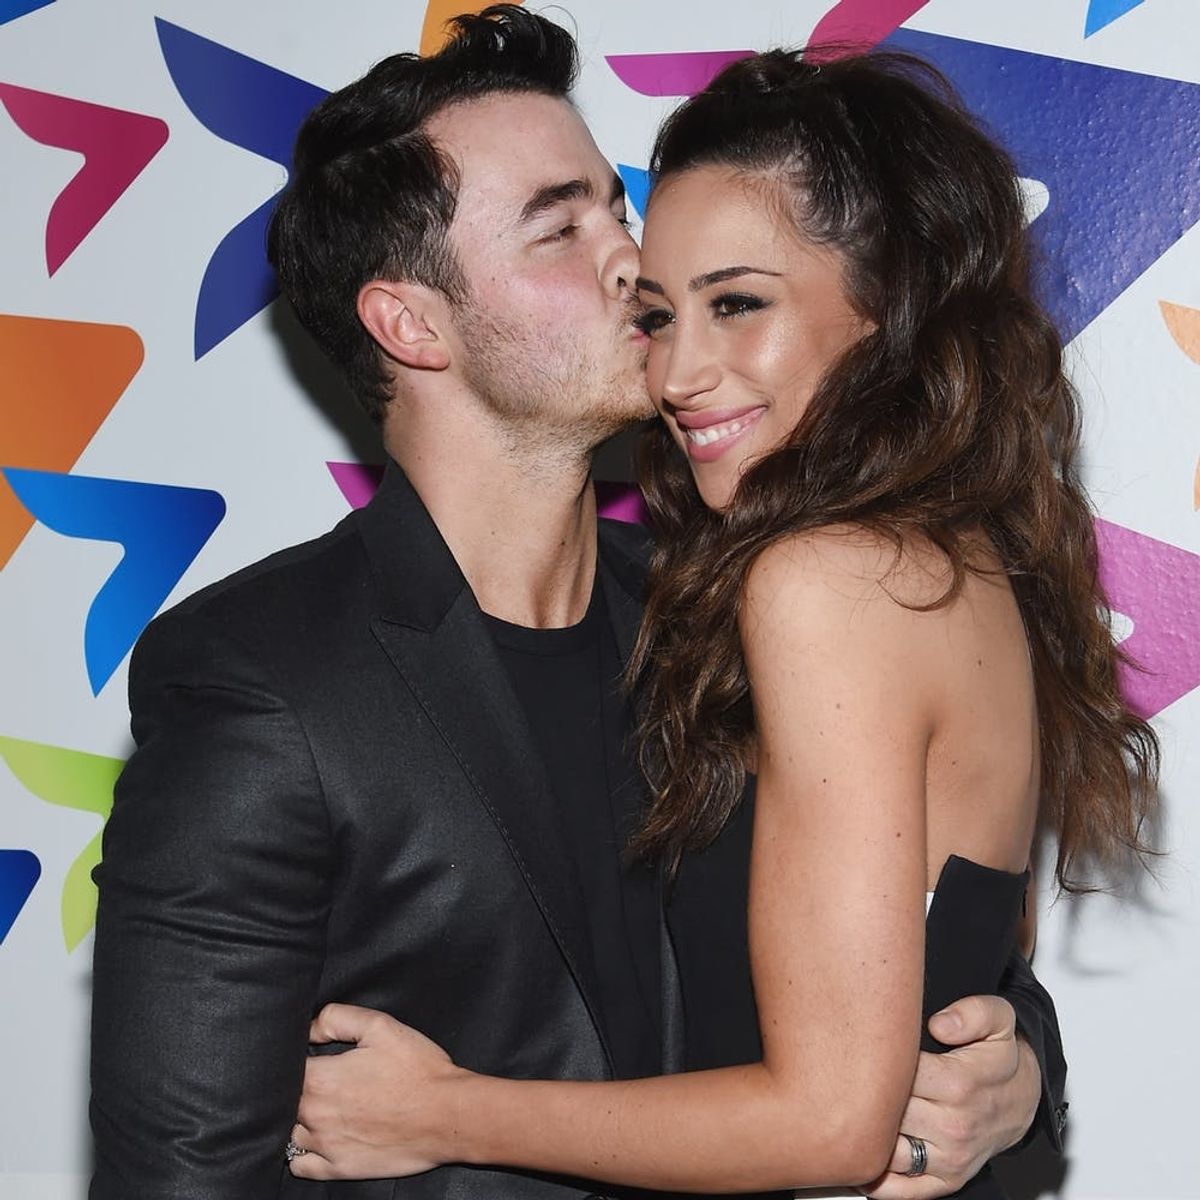 Morning Buzz! Kevin Jonas and Wife Danielle Reveal Their Baby’s Gender in an Adorable Snap